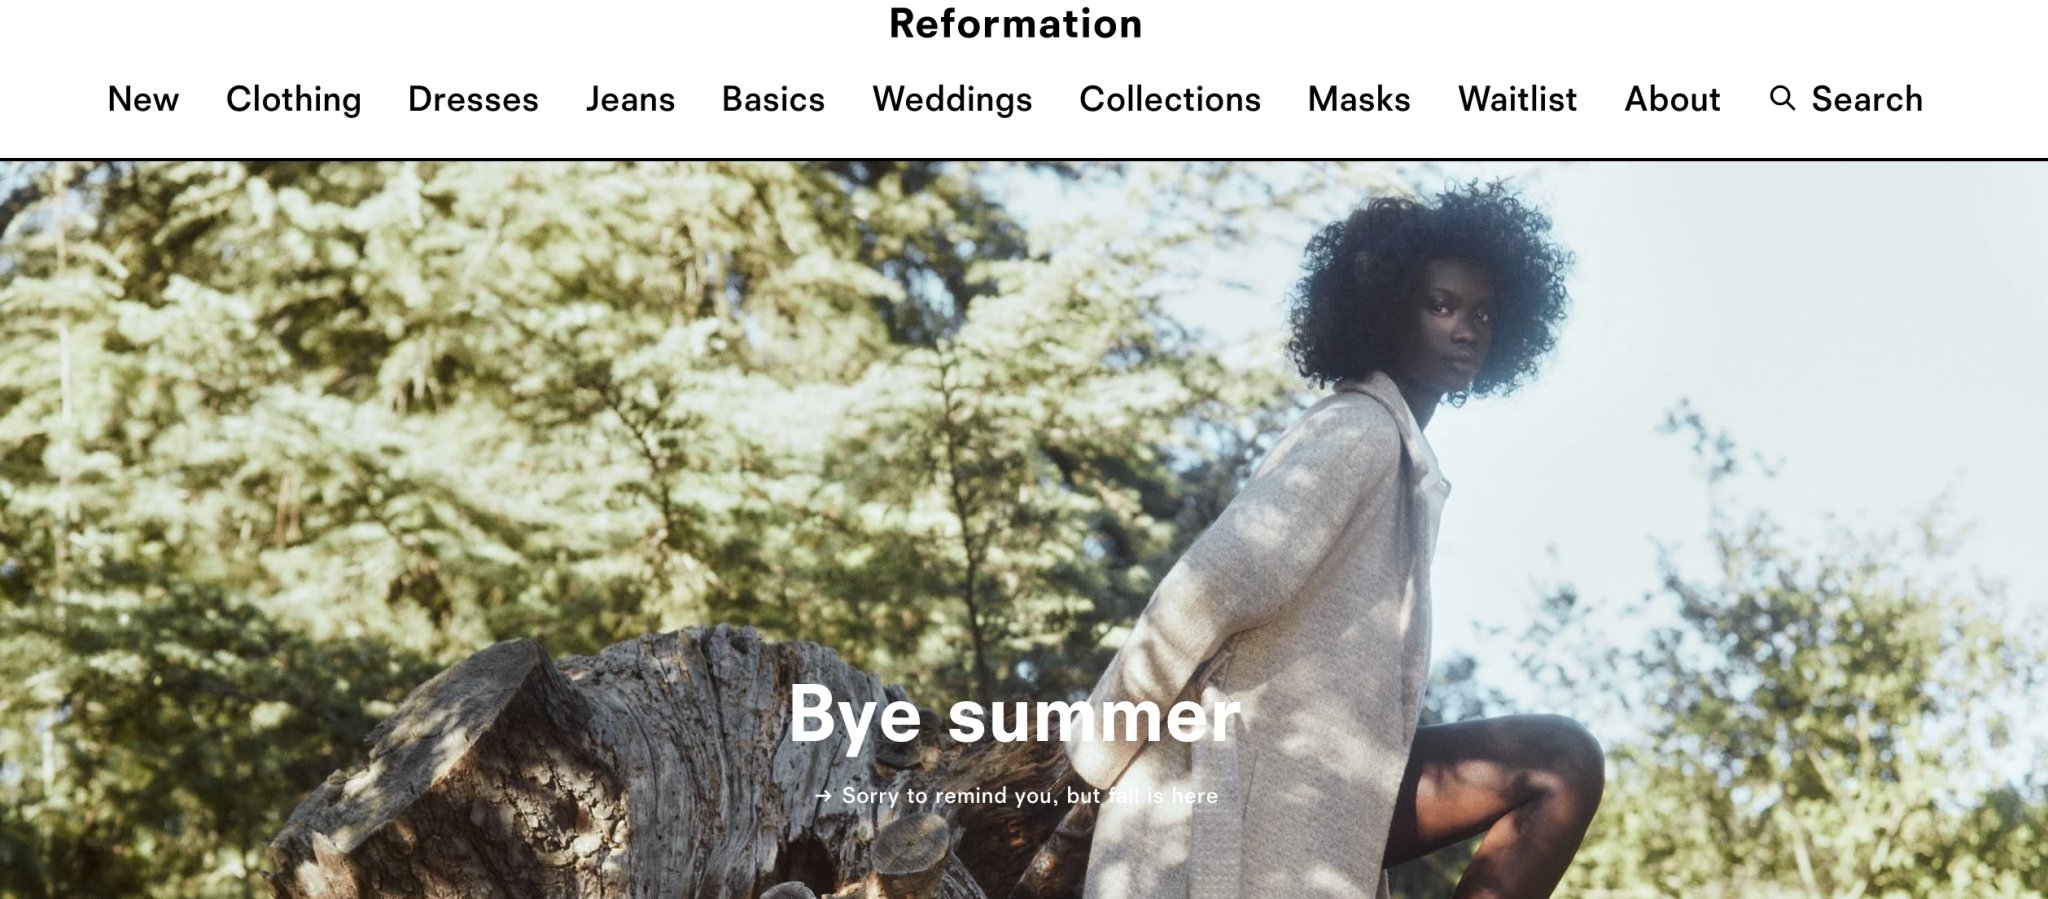 Sustainable Businesses We Love: The Reformation | With Love Darling